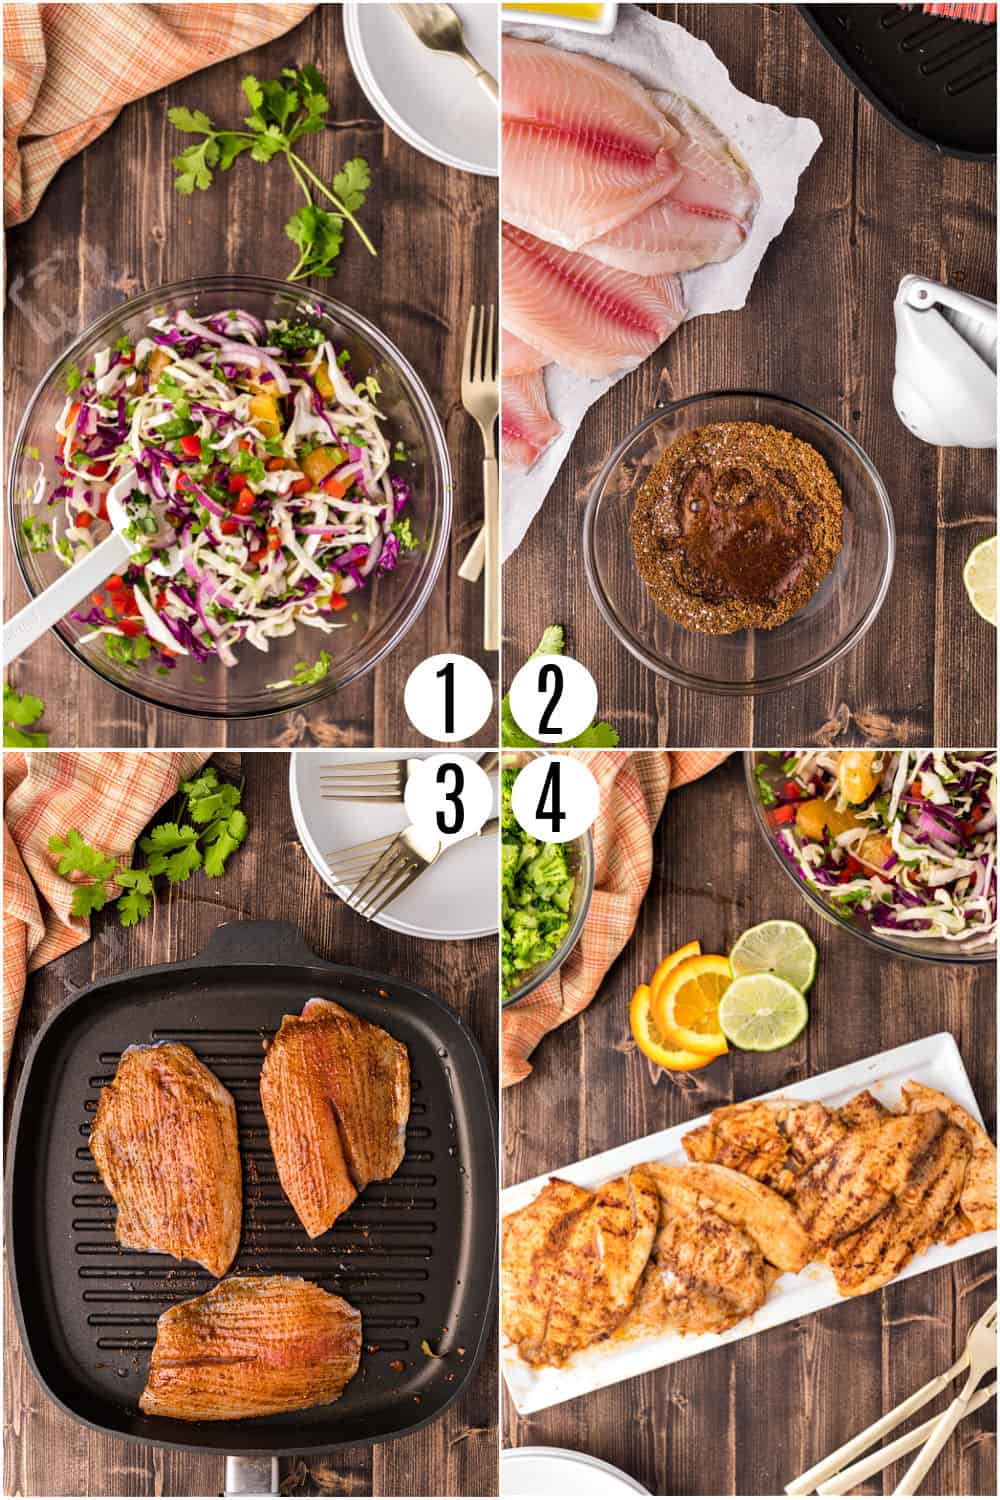 Step by step photos showing how to make grilled tilapia with citrus slaw.